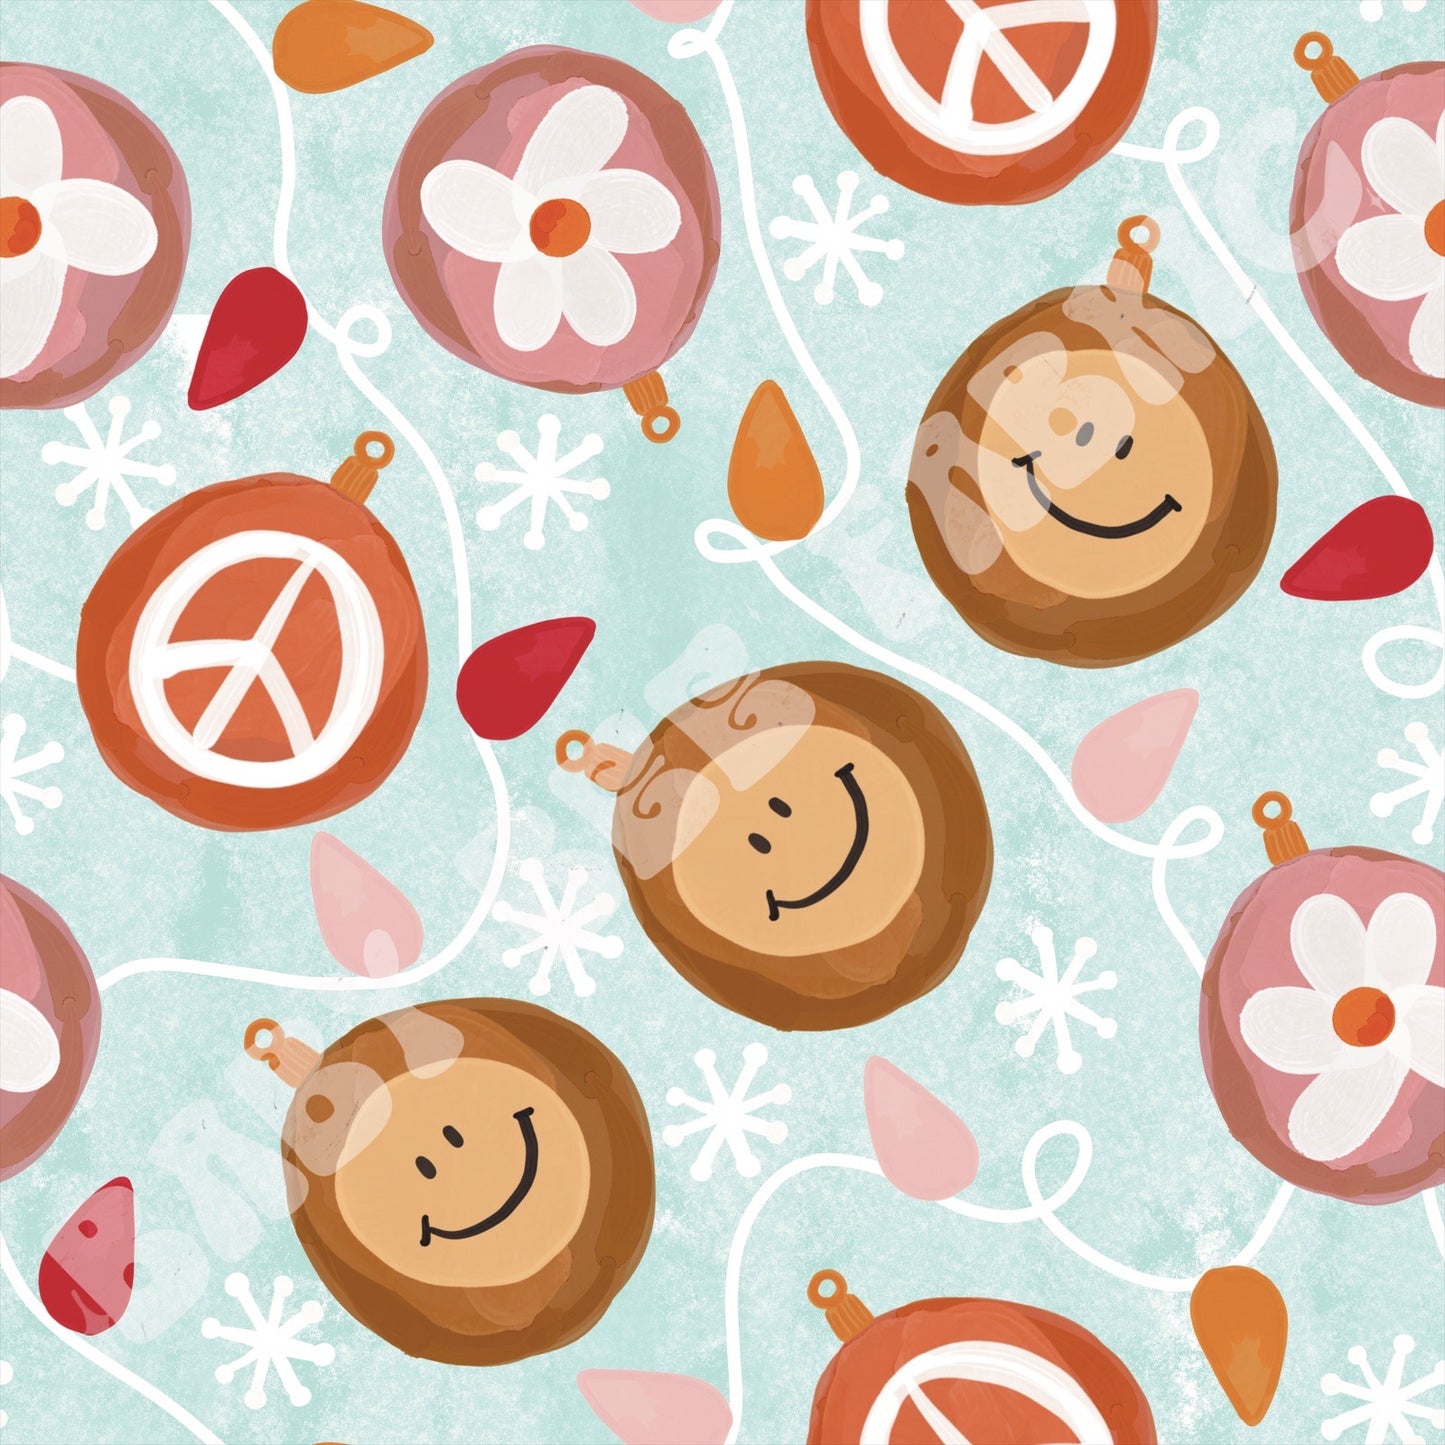 Groovy Smiley Ornaments